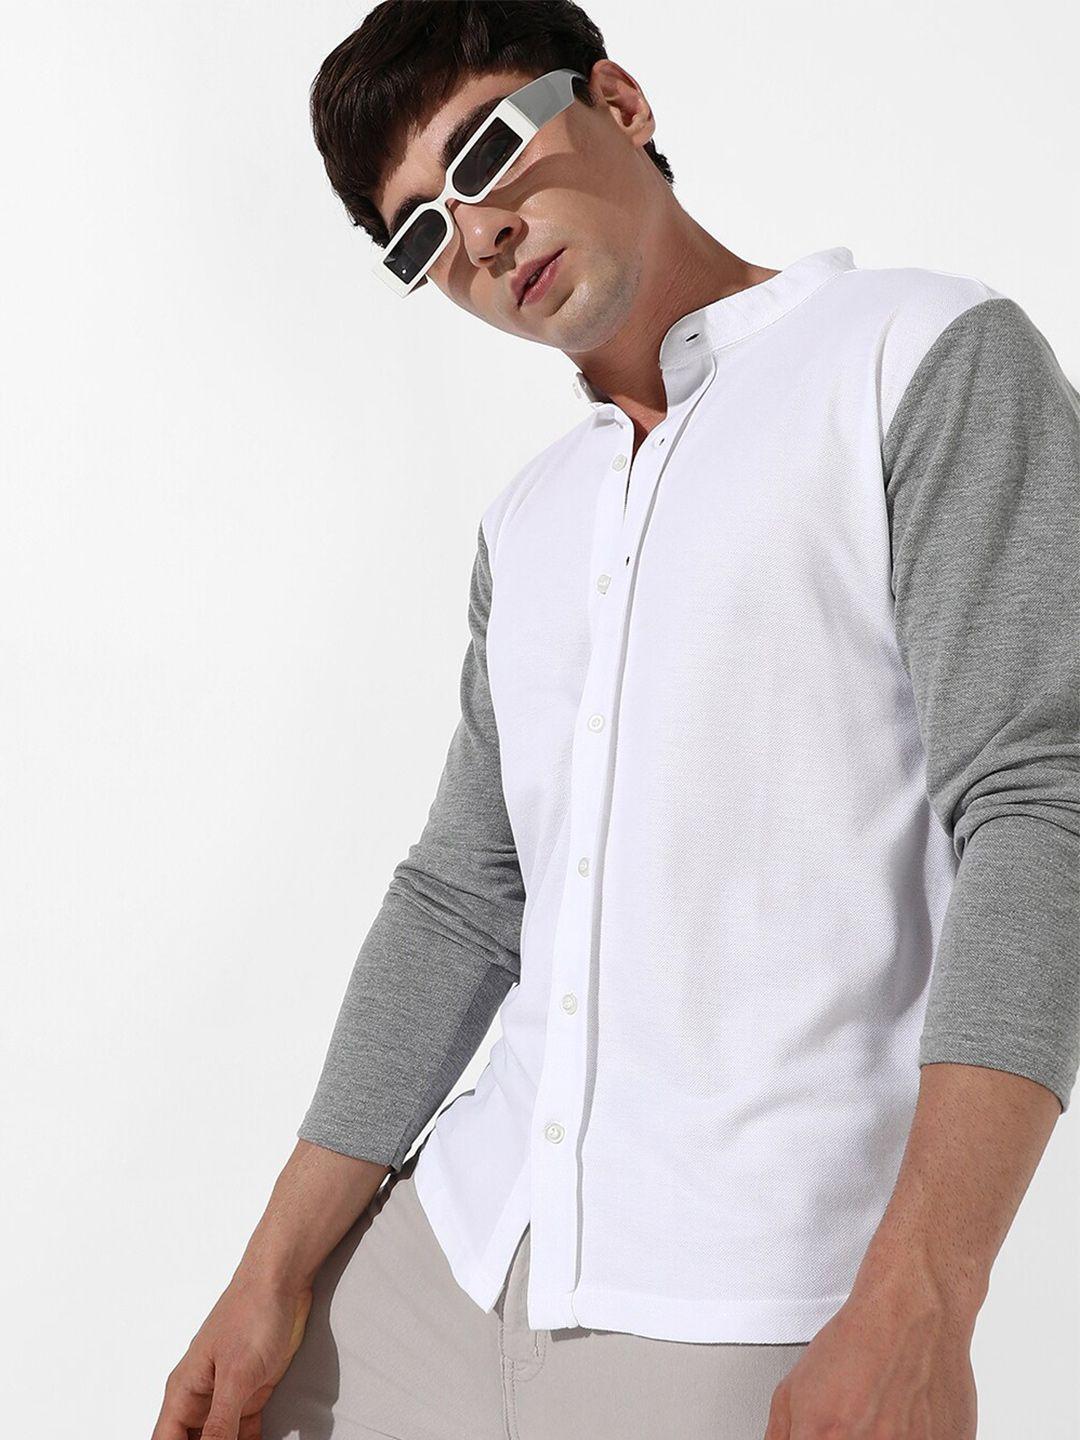 campus-sutra-grey-&-white-colourblocked-classic-fit-cotton-casual-shirt